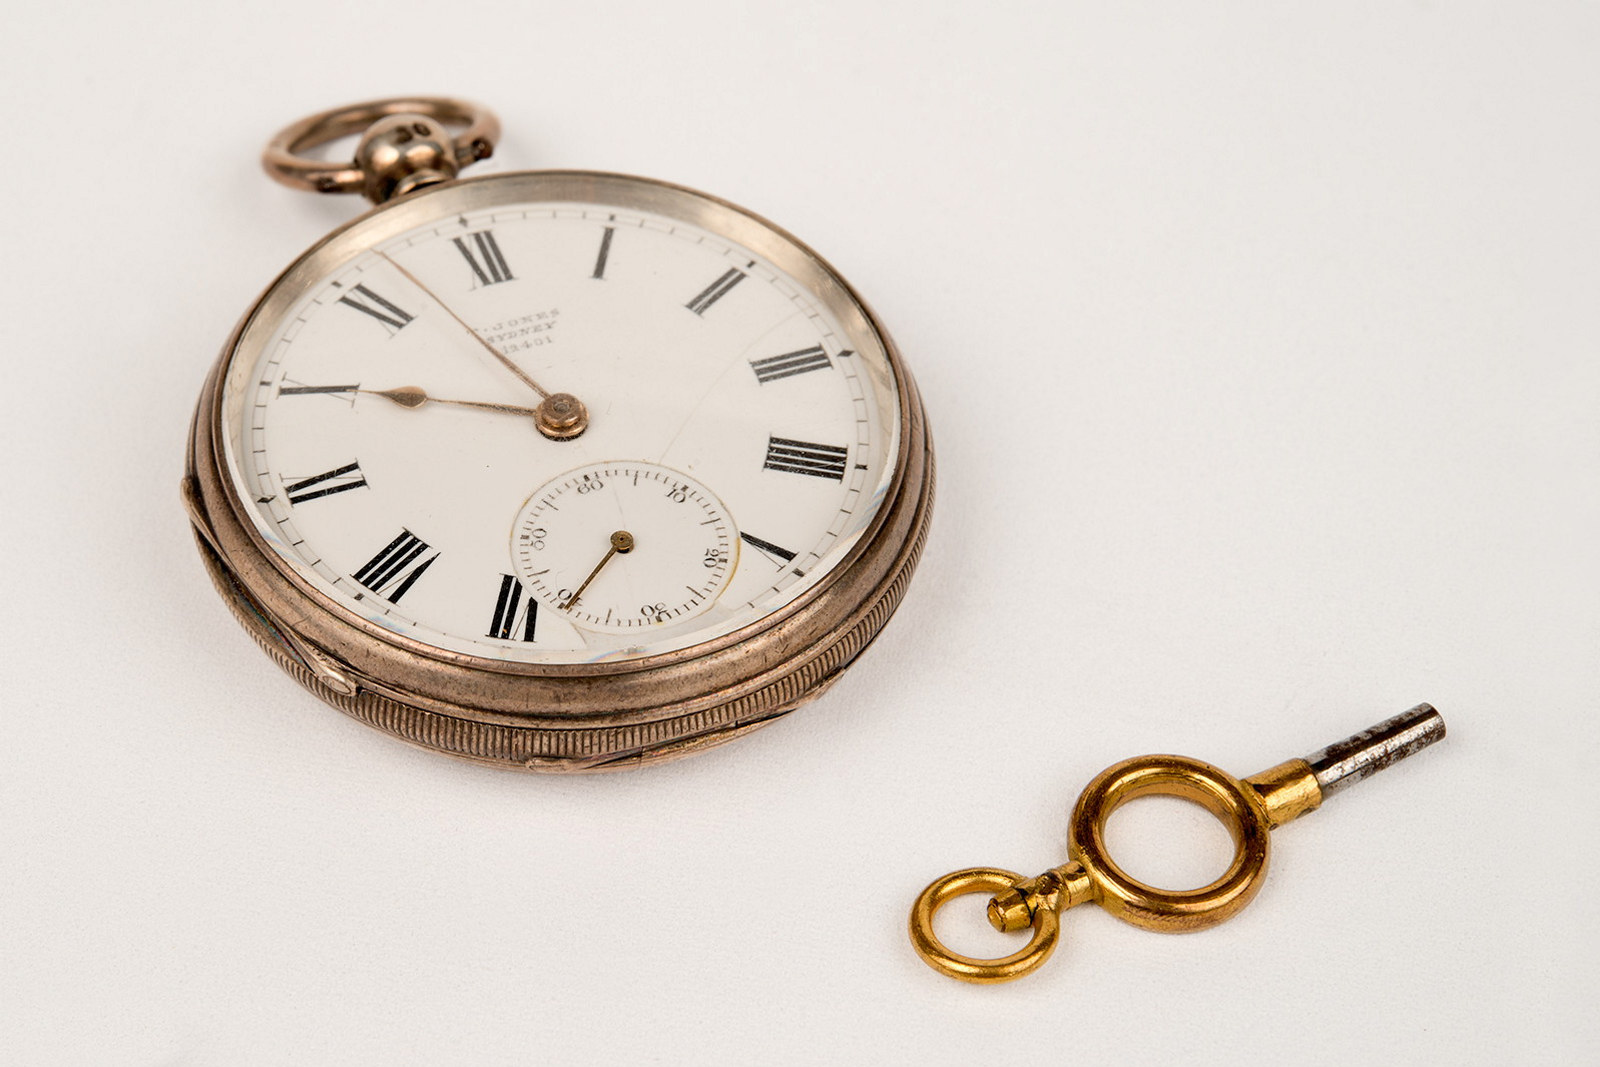 Open faced silver fob watch owned by Edwin Stephen Rouse